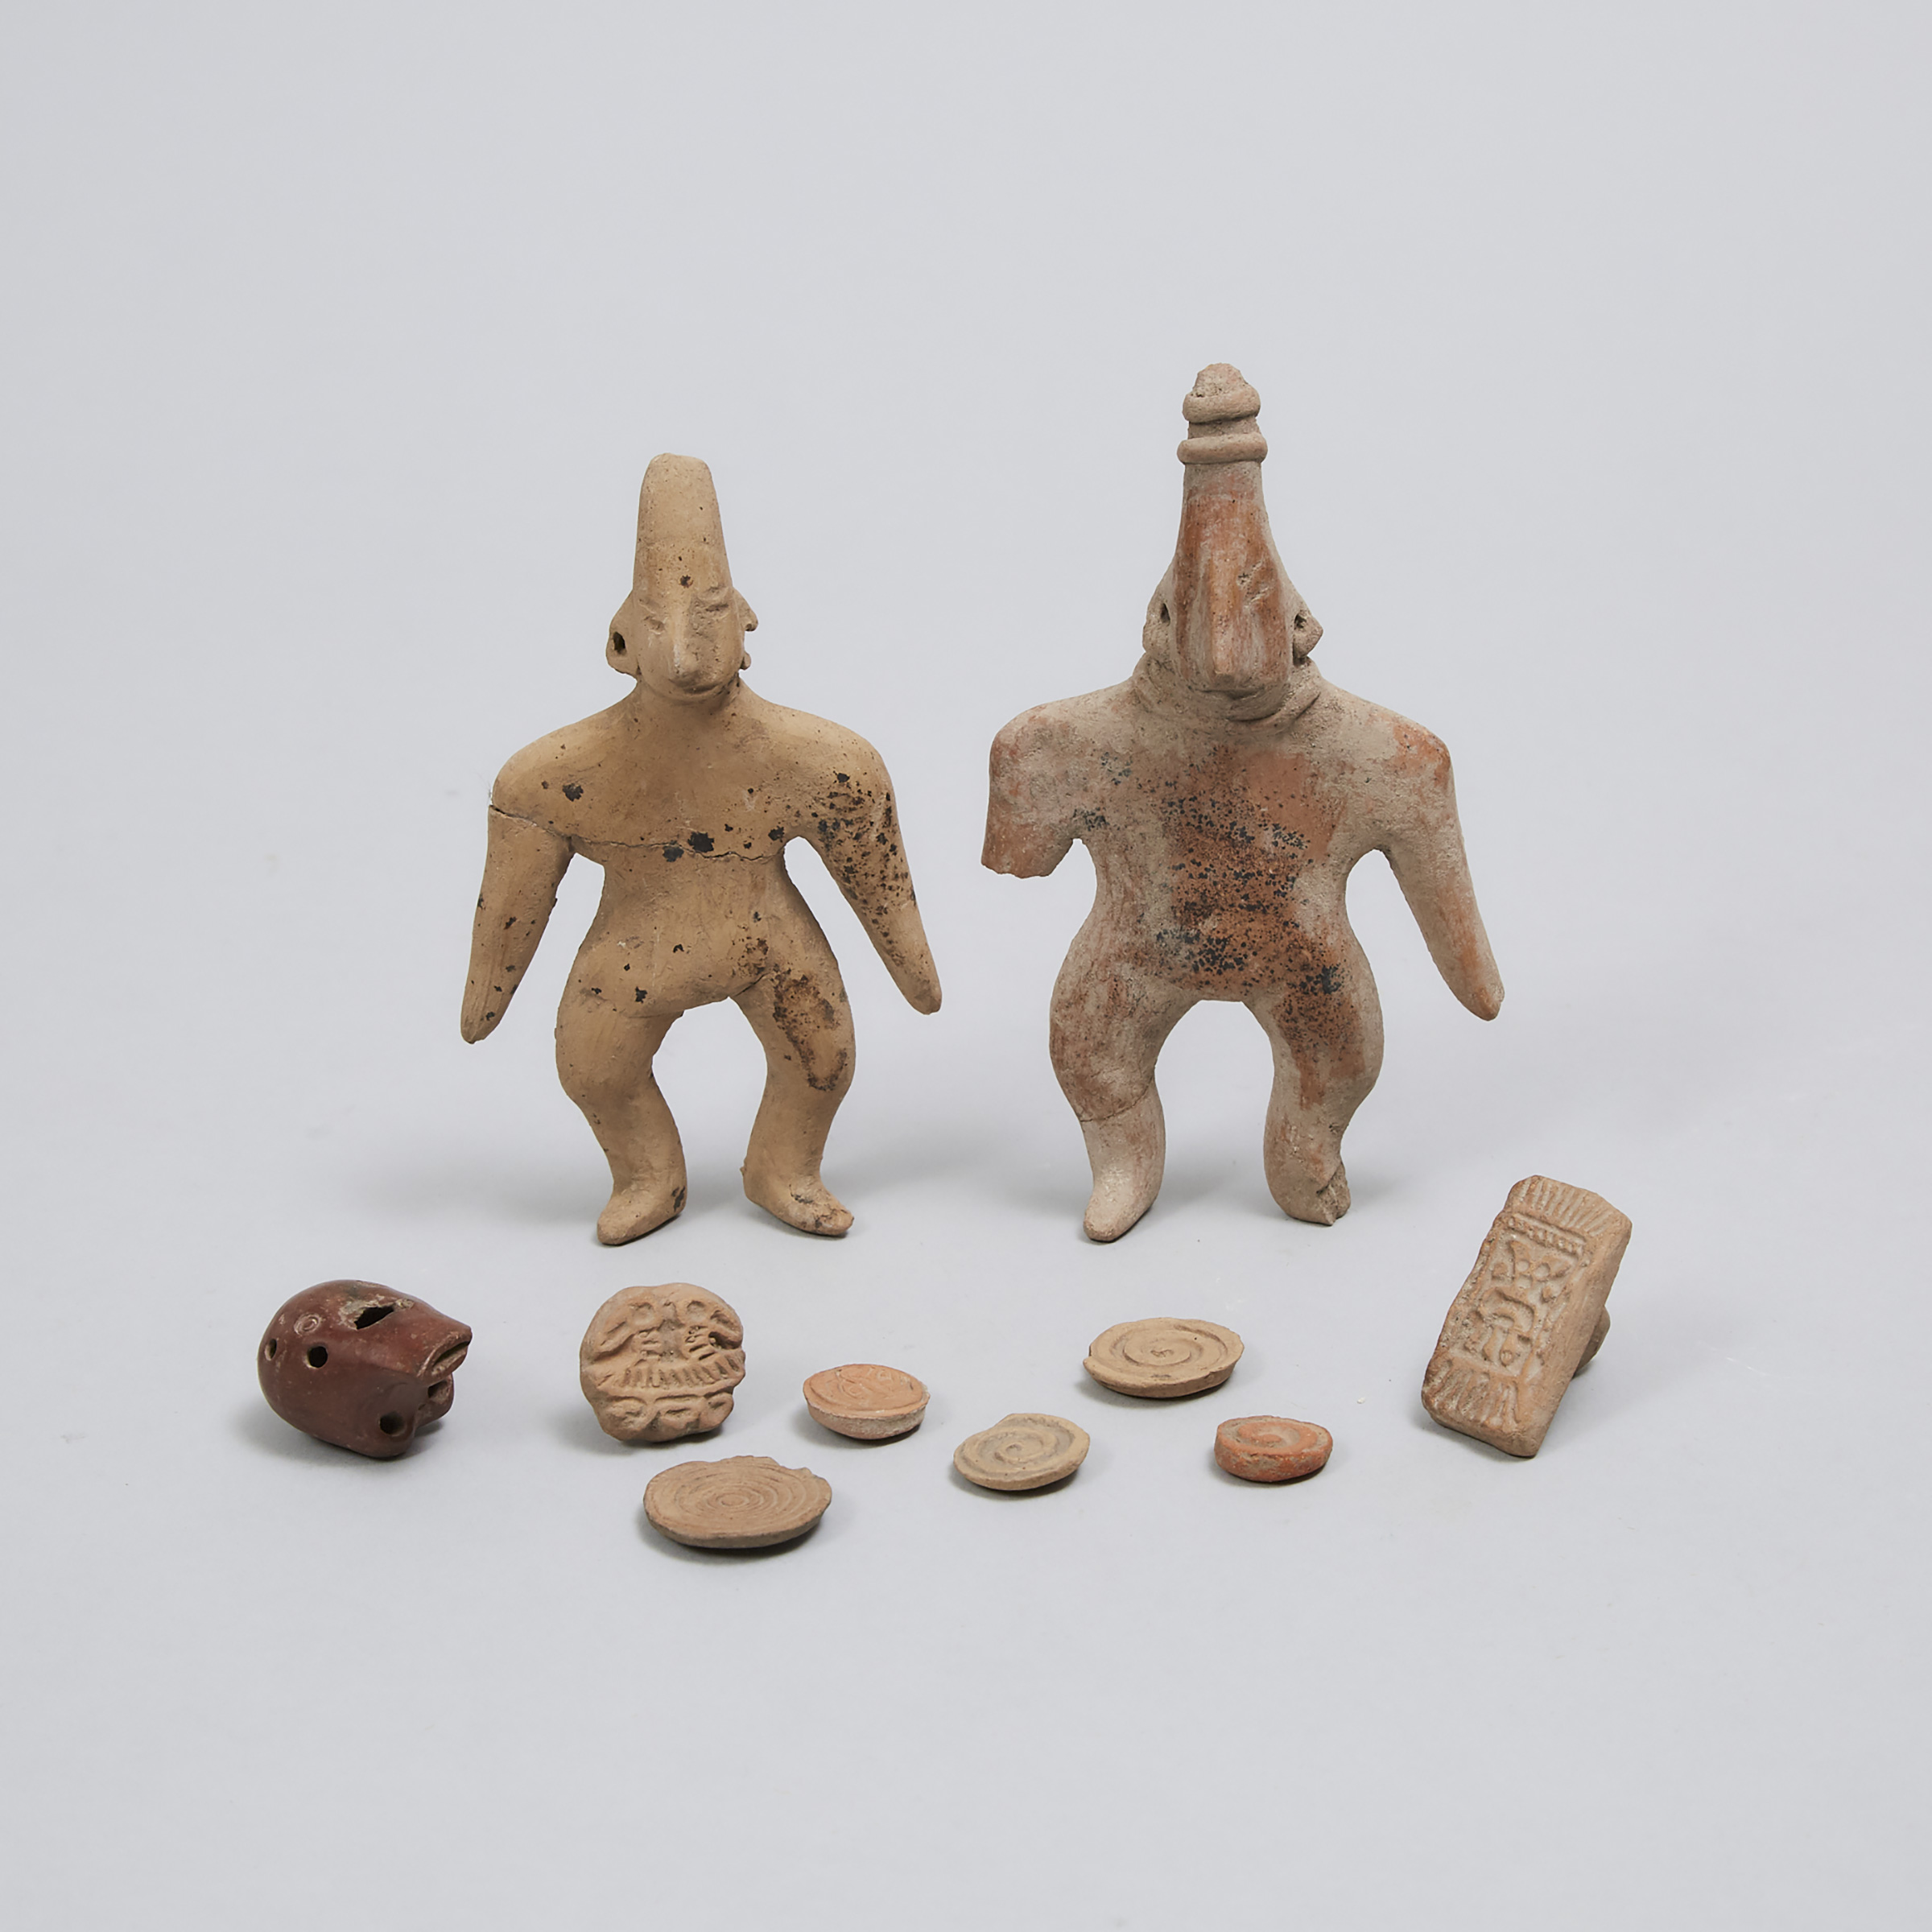 Group of Pre-Columbian Pottery, West Mexico, early 1st Millennium 